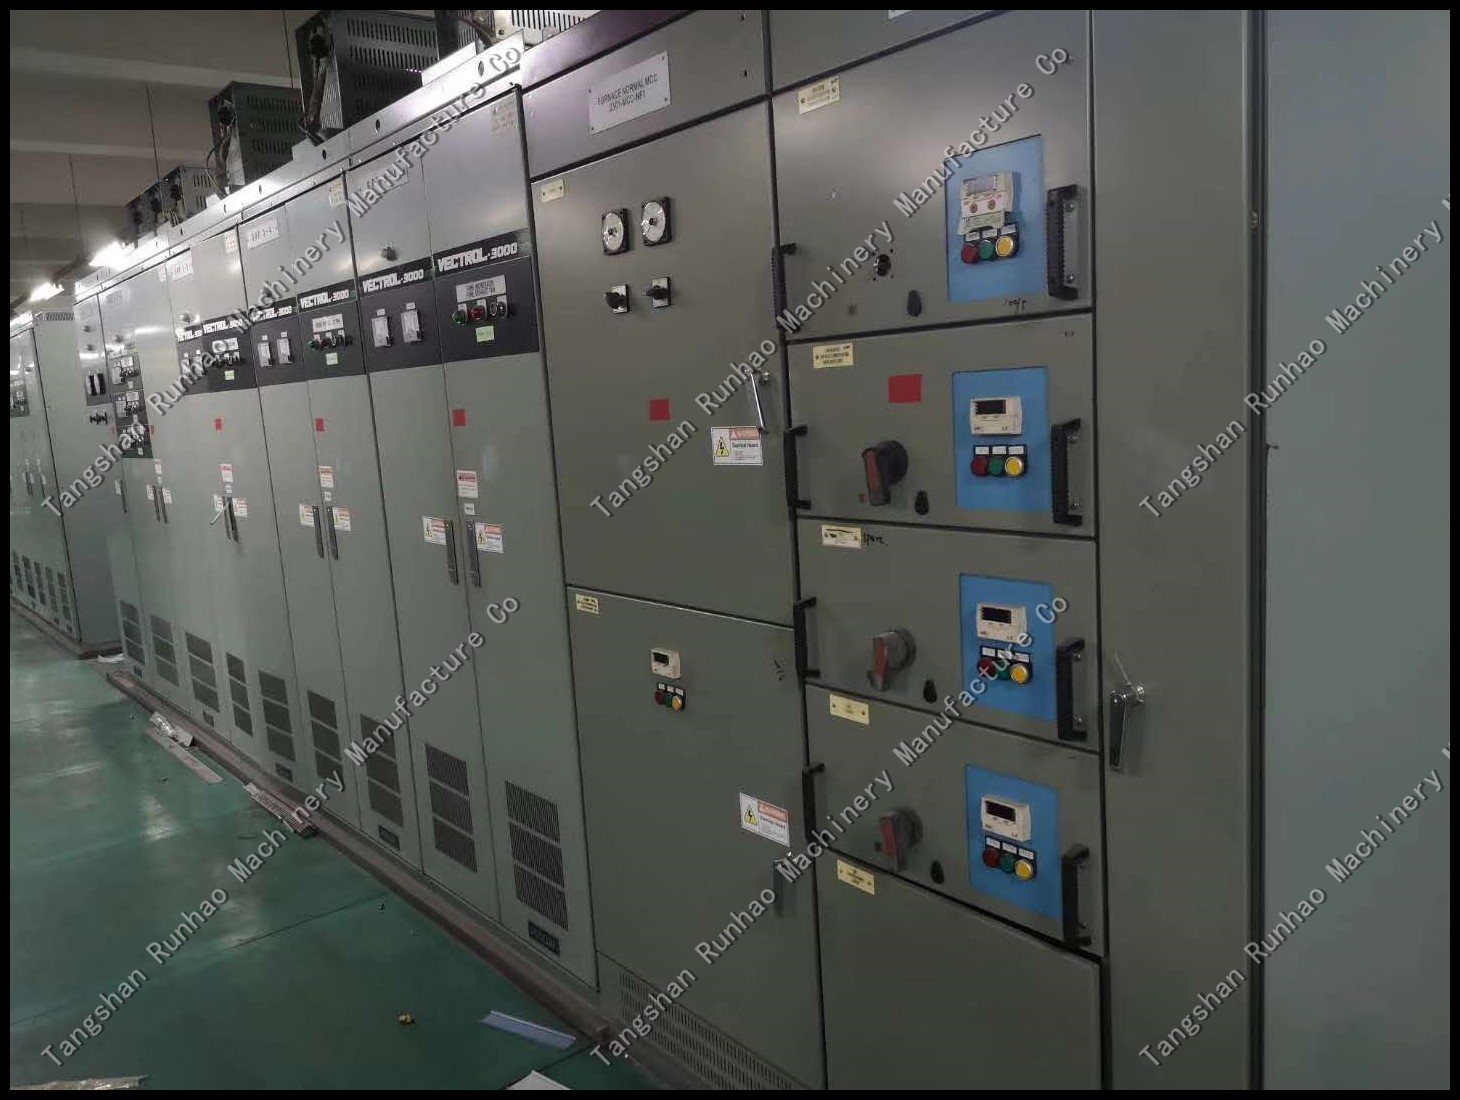 Electronic control cabinet